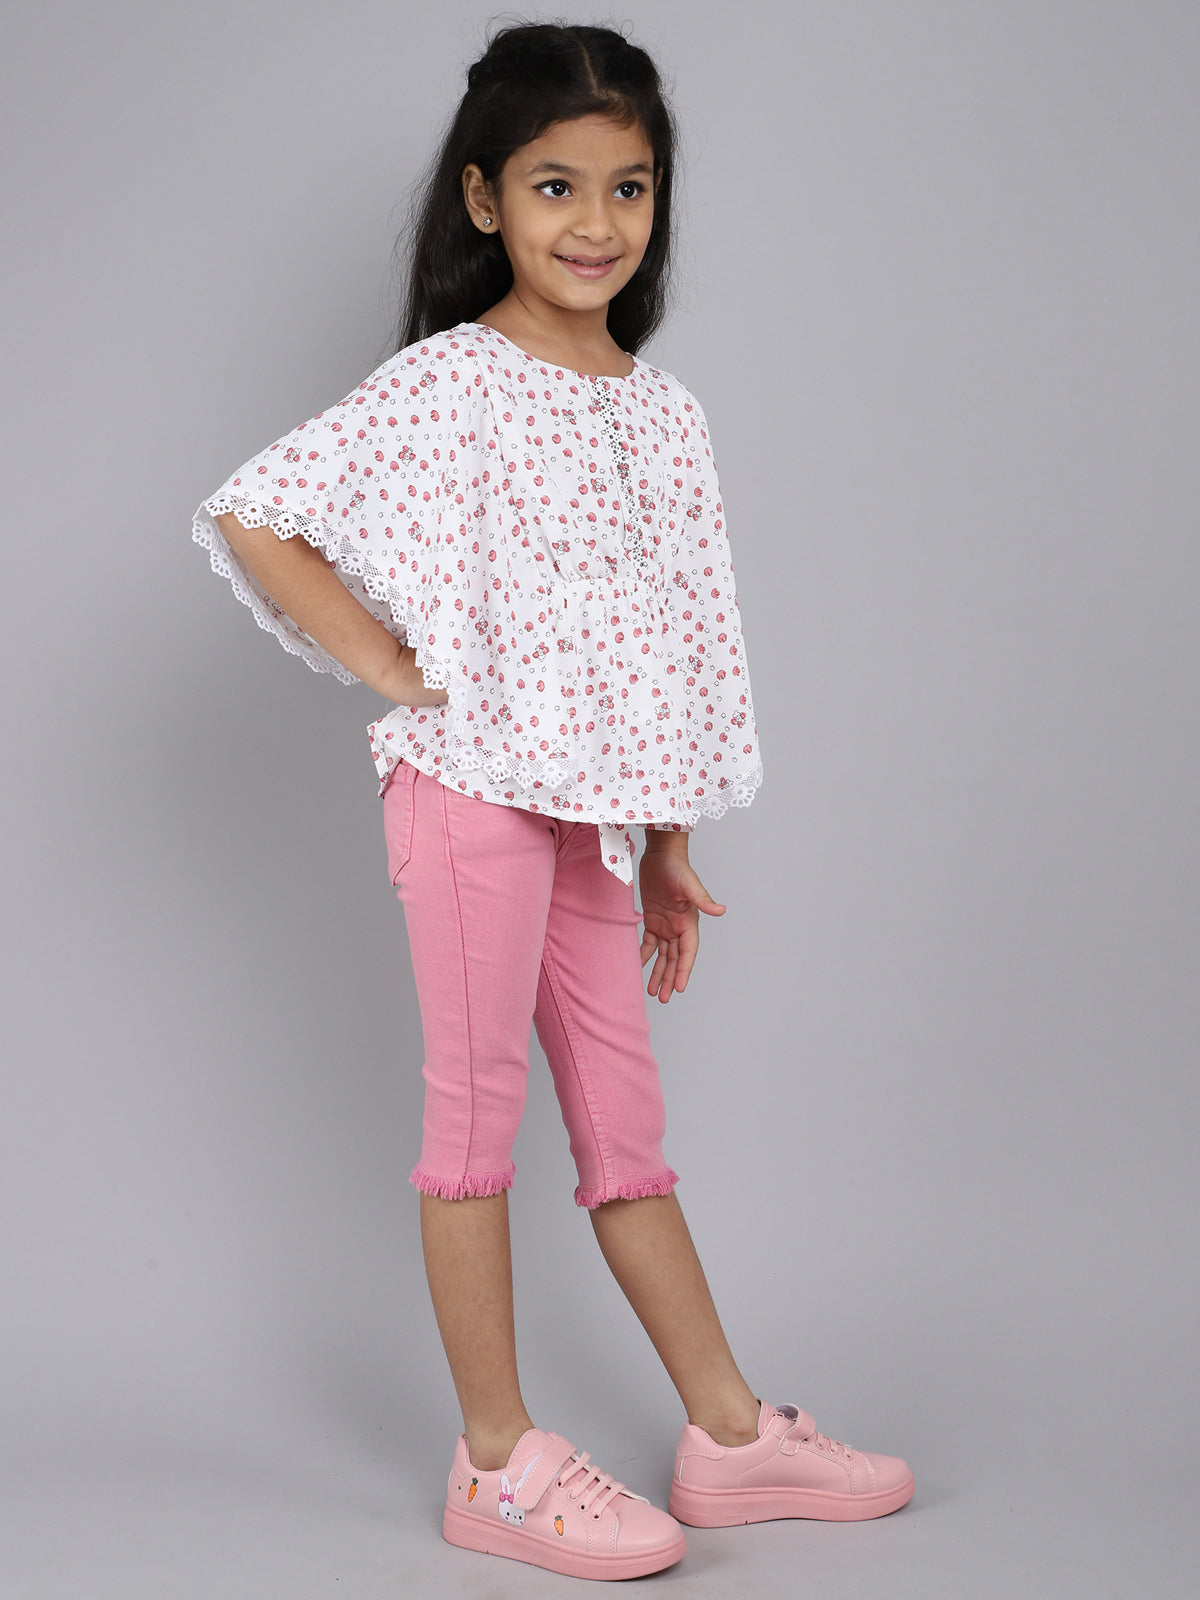 Half Sleeve Top & Pant with Pink Color for kids